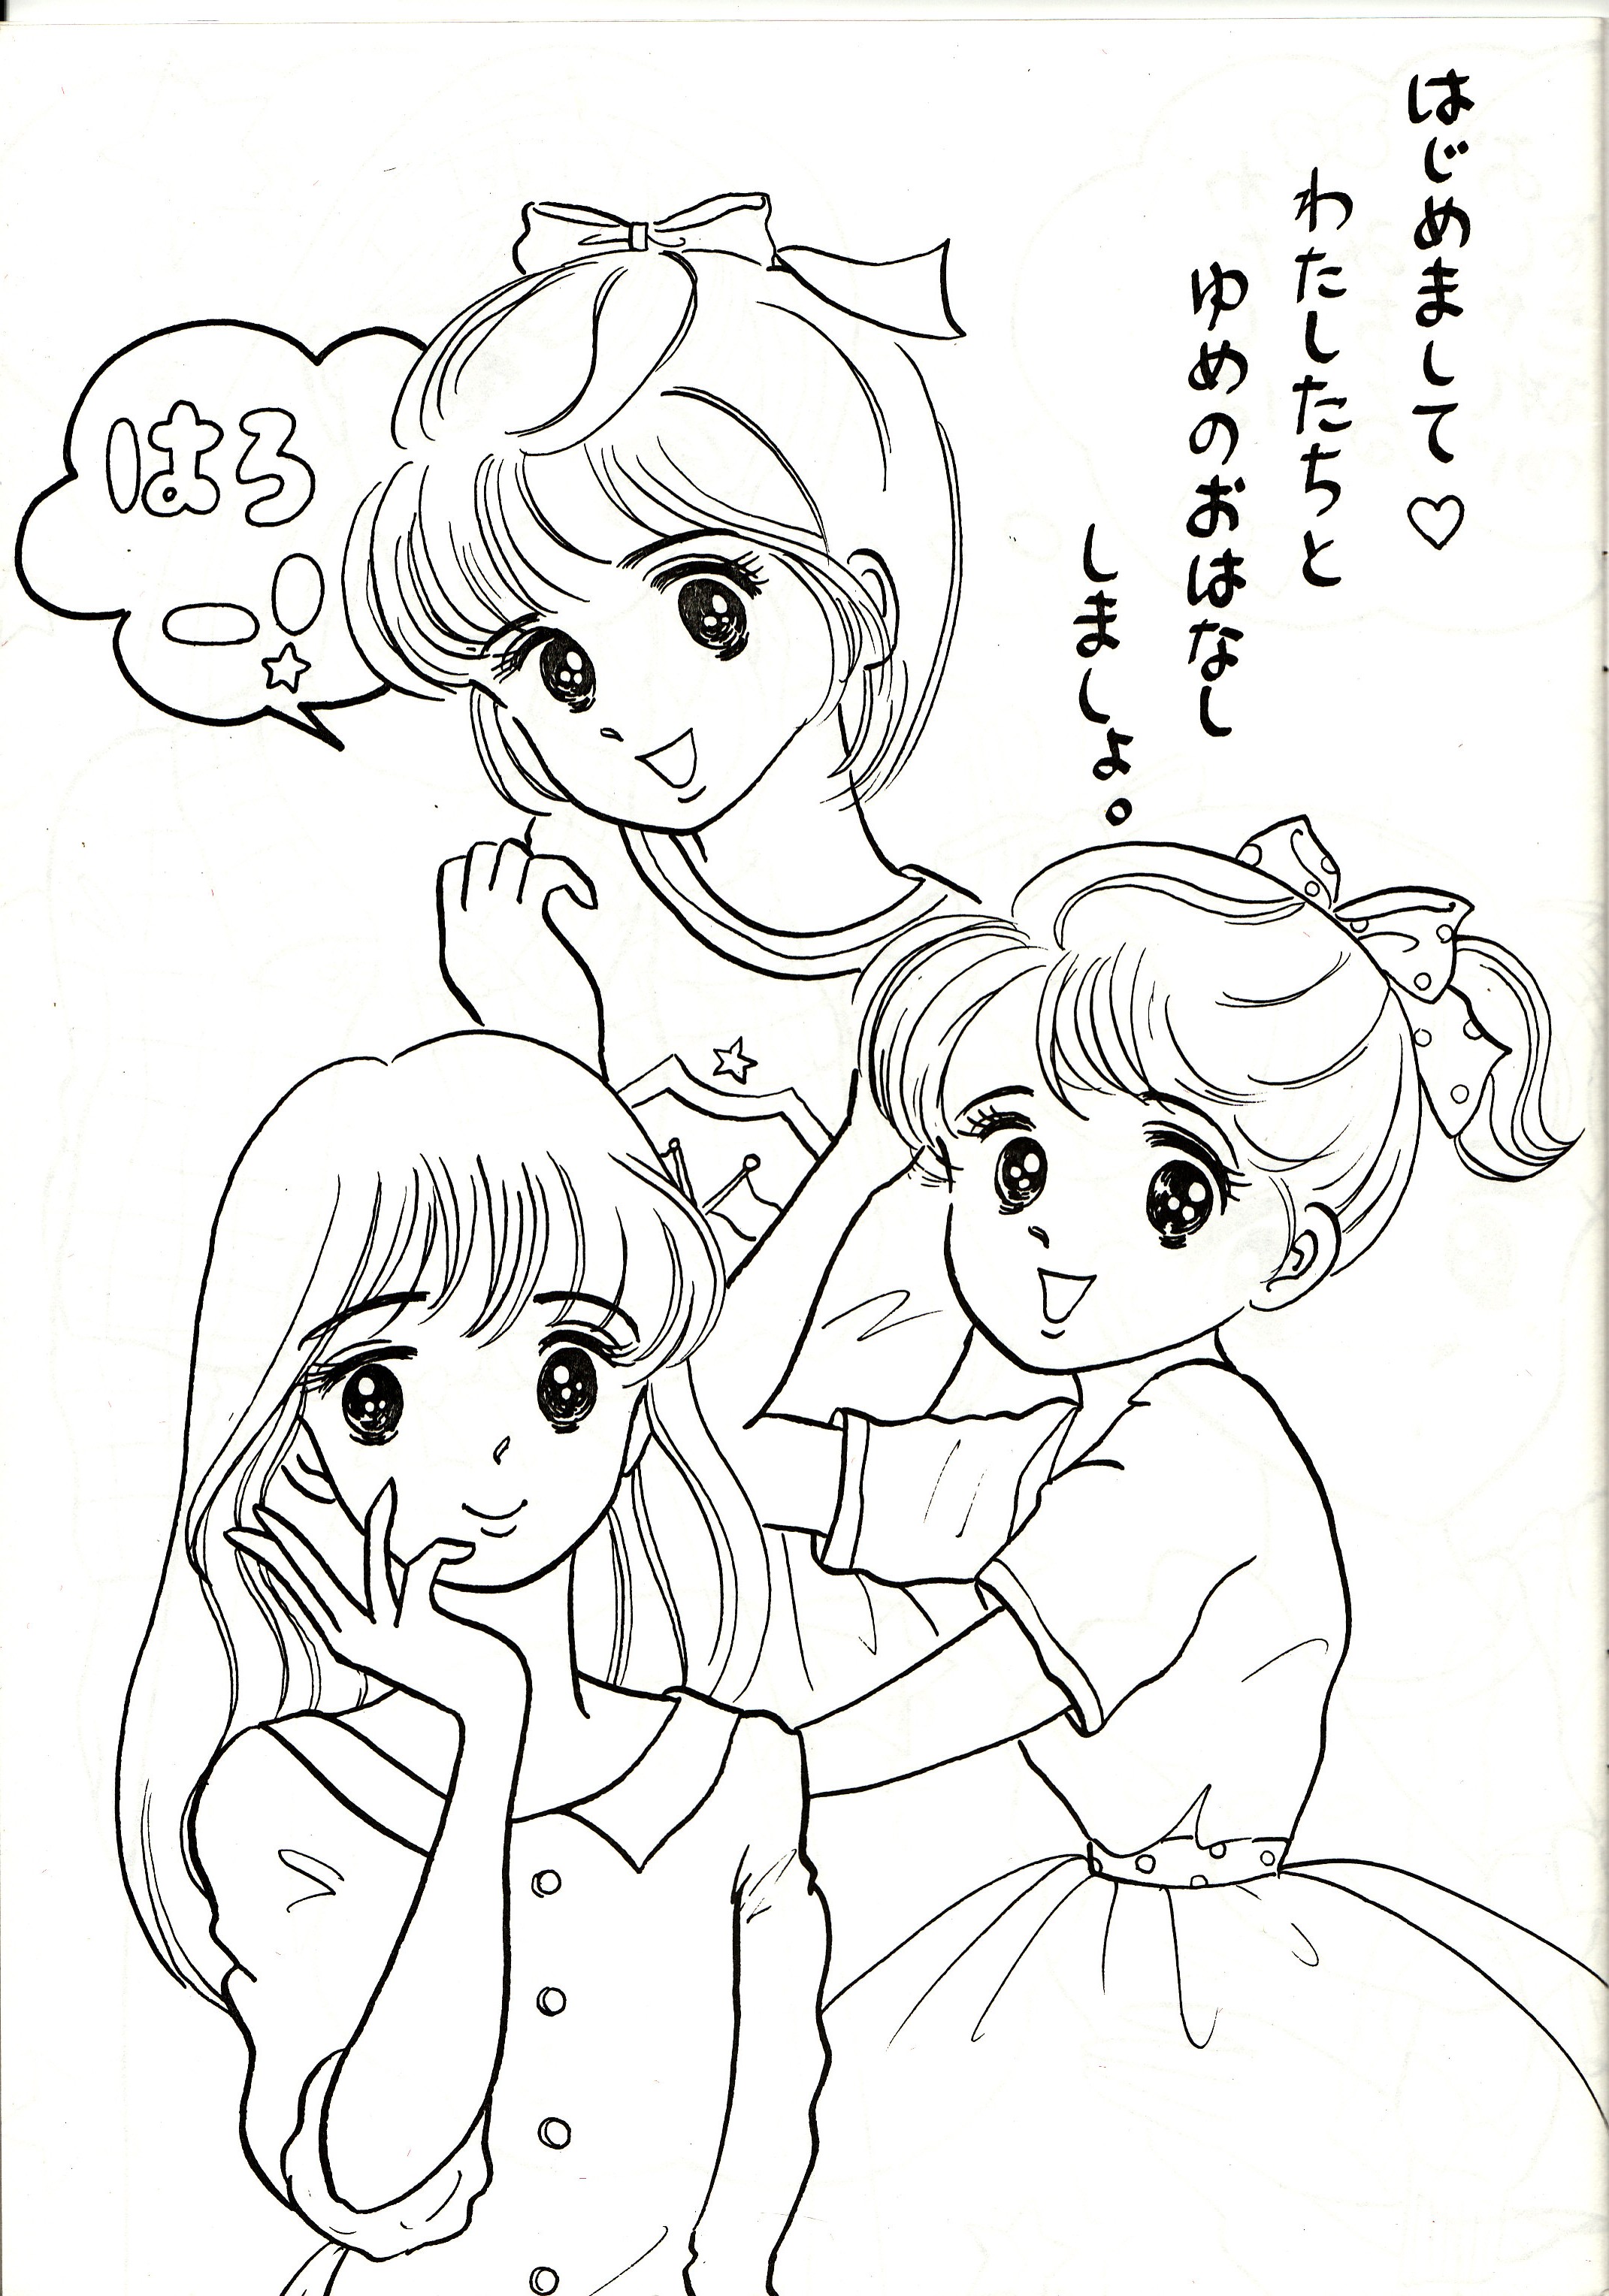 Best Friends | Coloring page from a booklet purchased at Dai… | Flickr